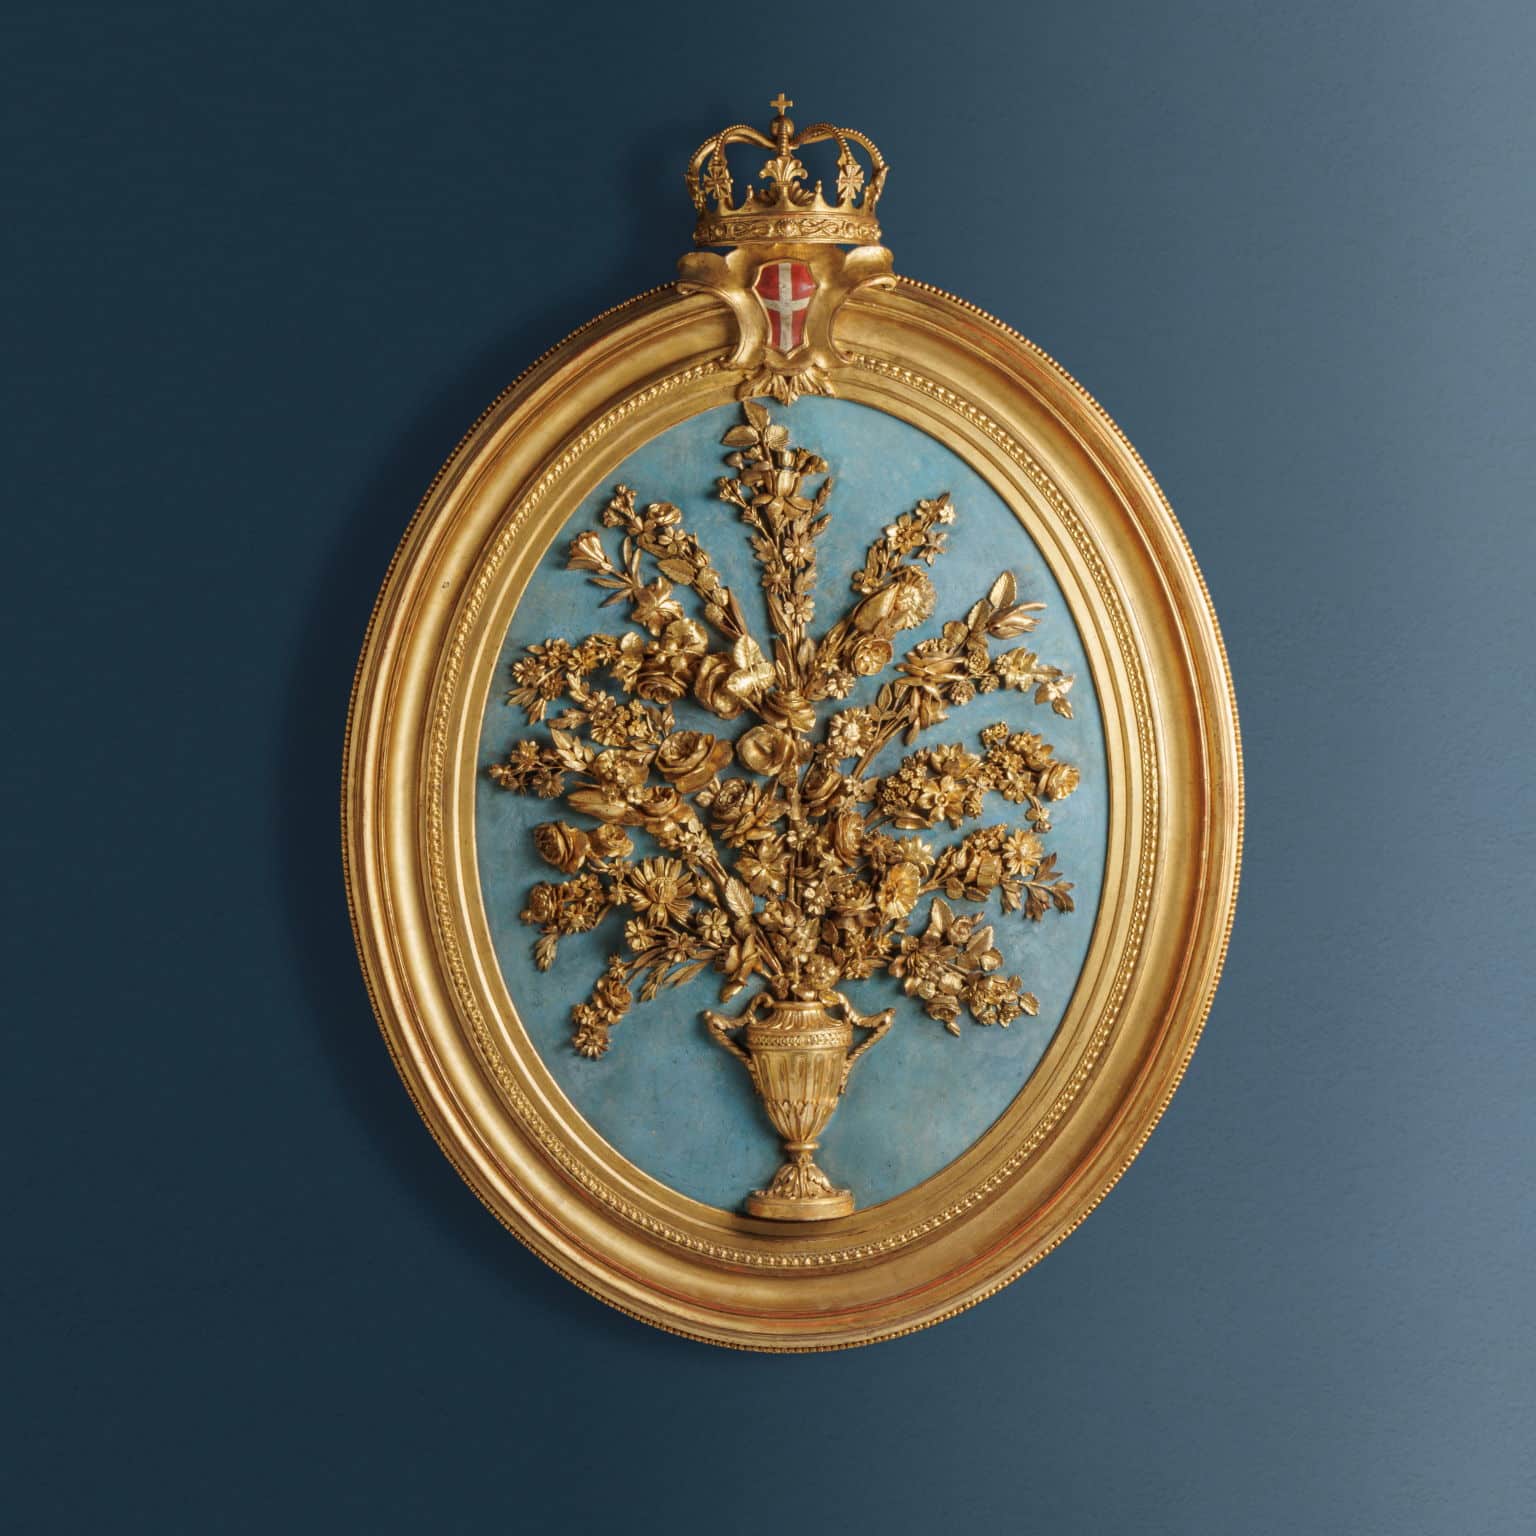 Floral carving. Turin, late 18th century